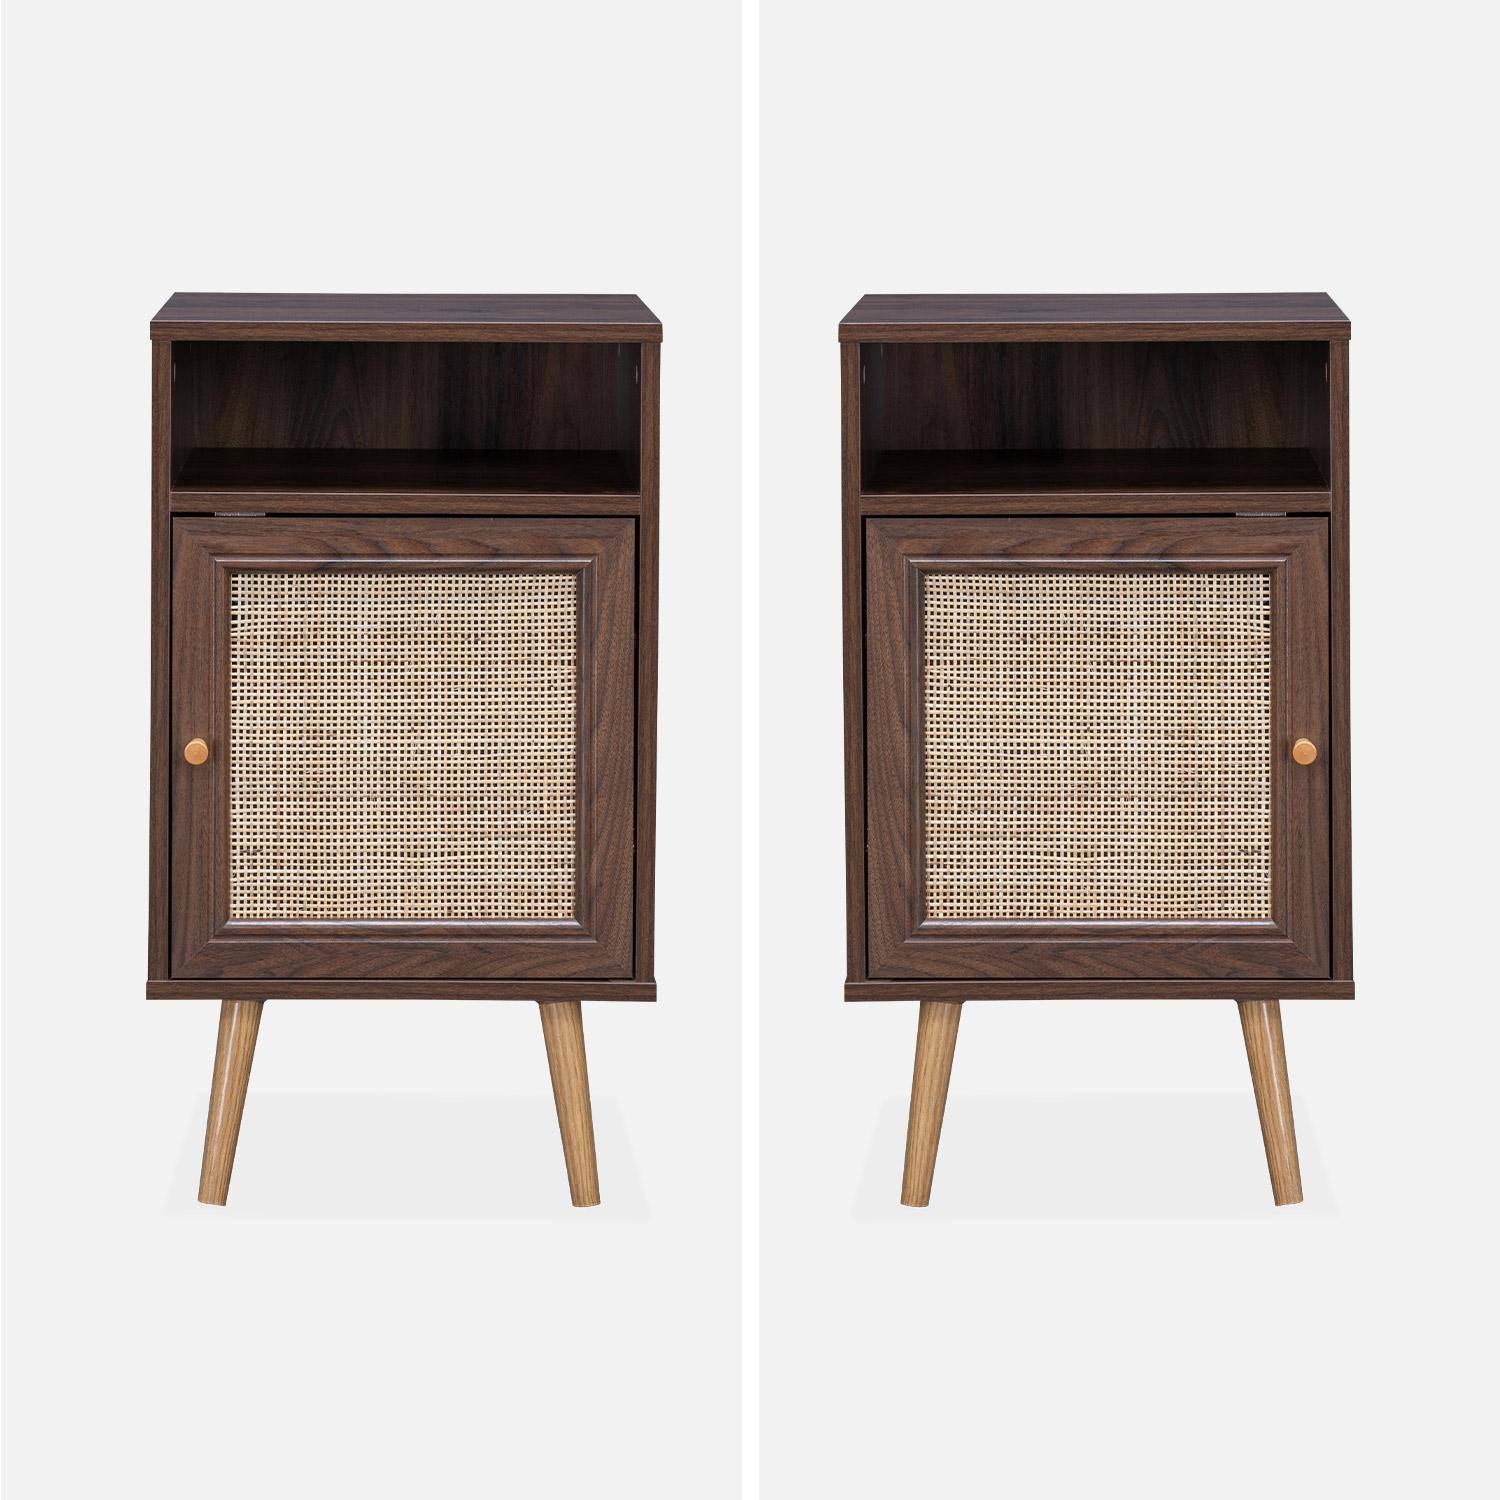 Pair of Scandi-style wood and cane rattan bedside tables with cupboard, 40x39x70cm - Boheme - Dark Wood colour,sweeek,Photo4